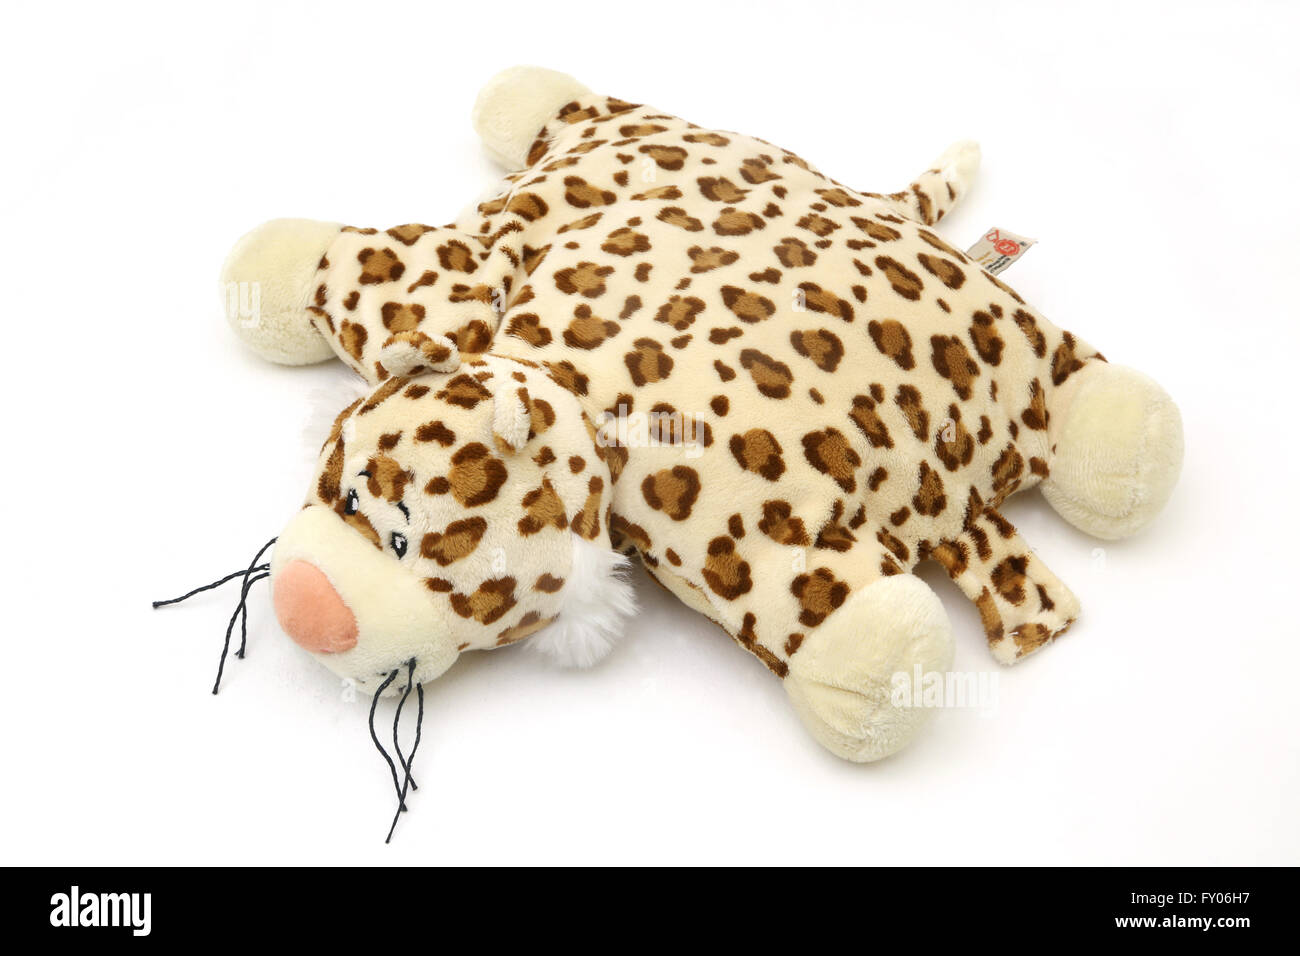 Toy Leopard High Resolution Stock Photography and Images - Alamy